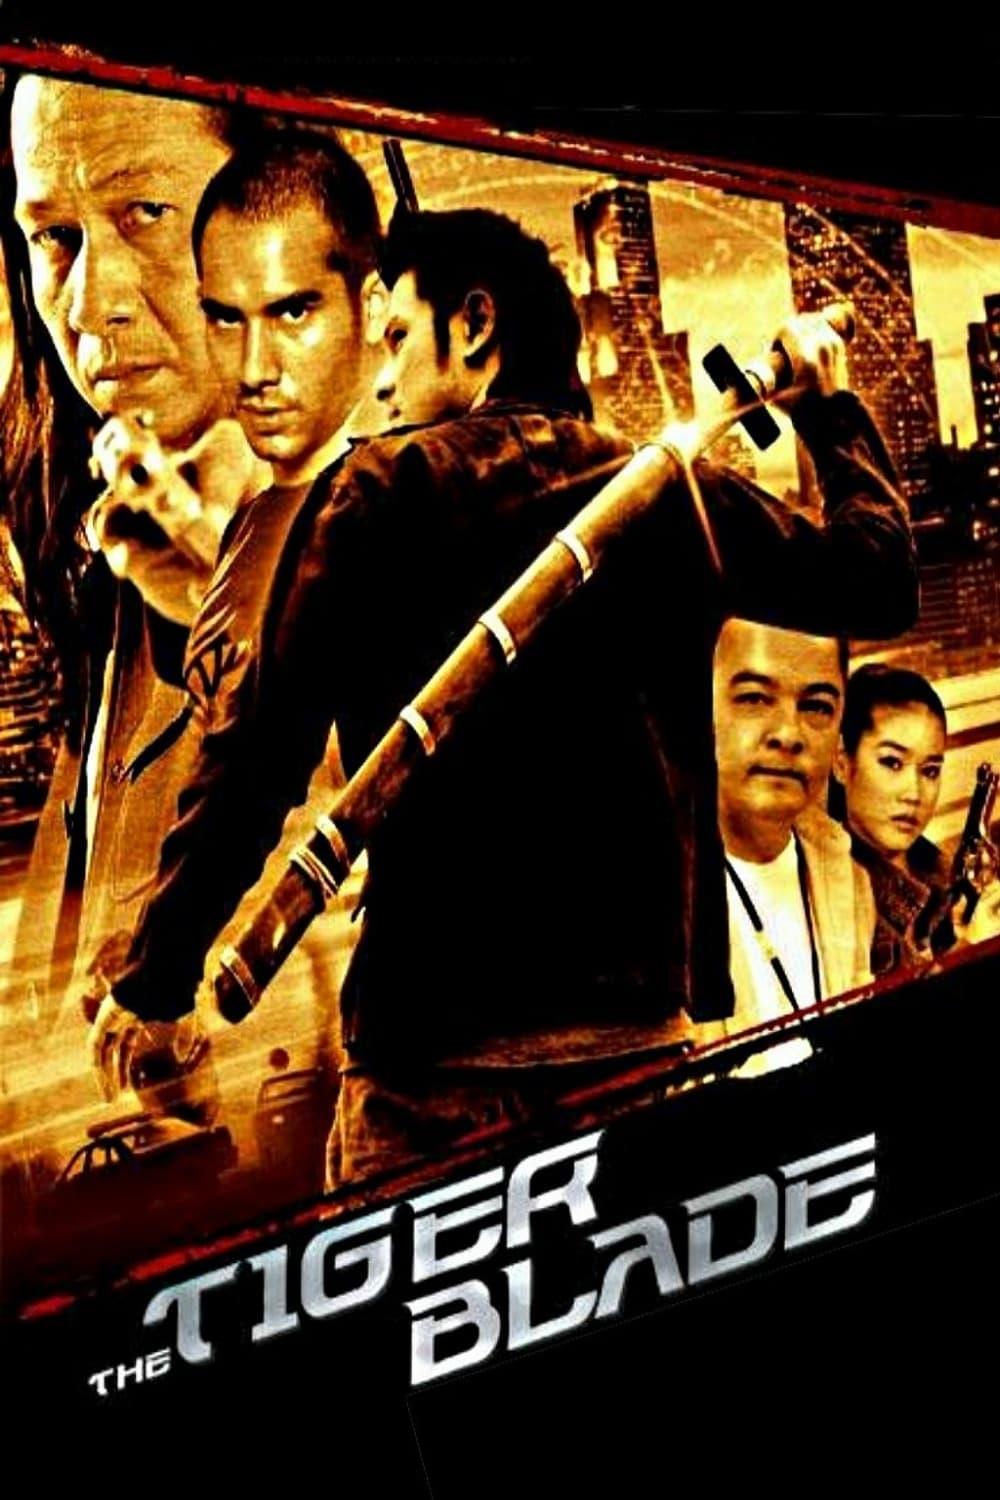 The Tiger Blade poster